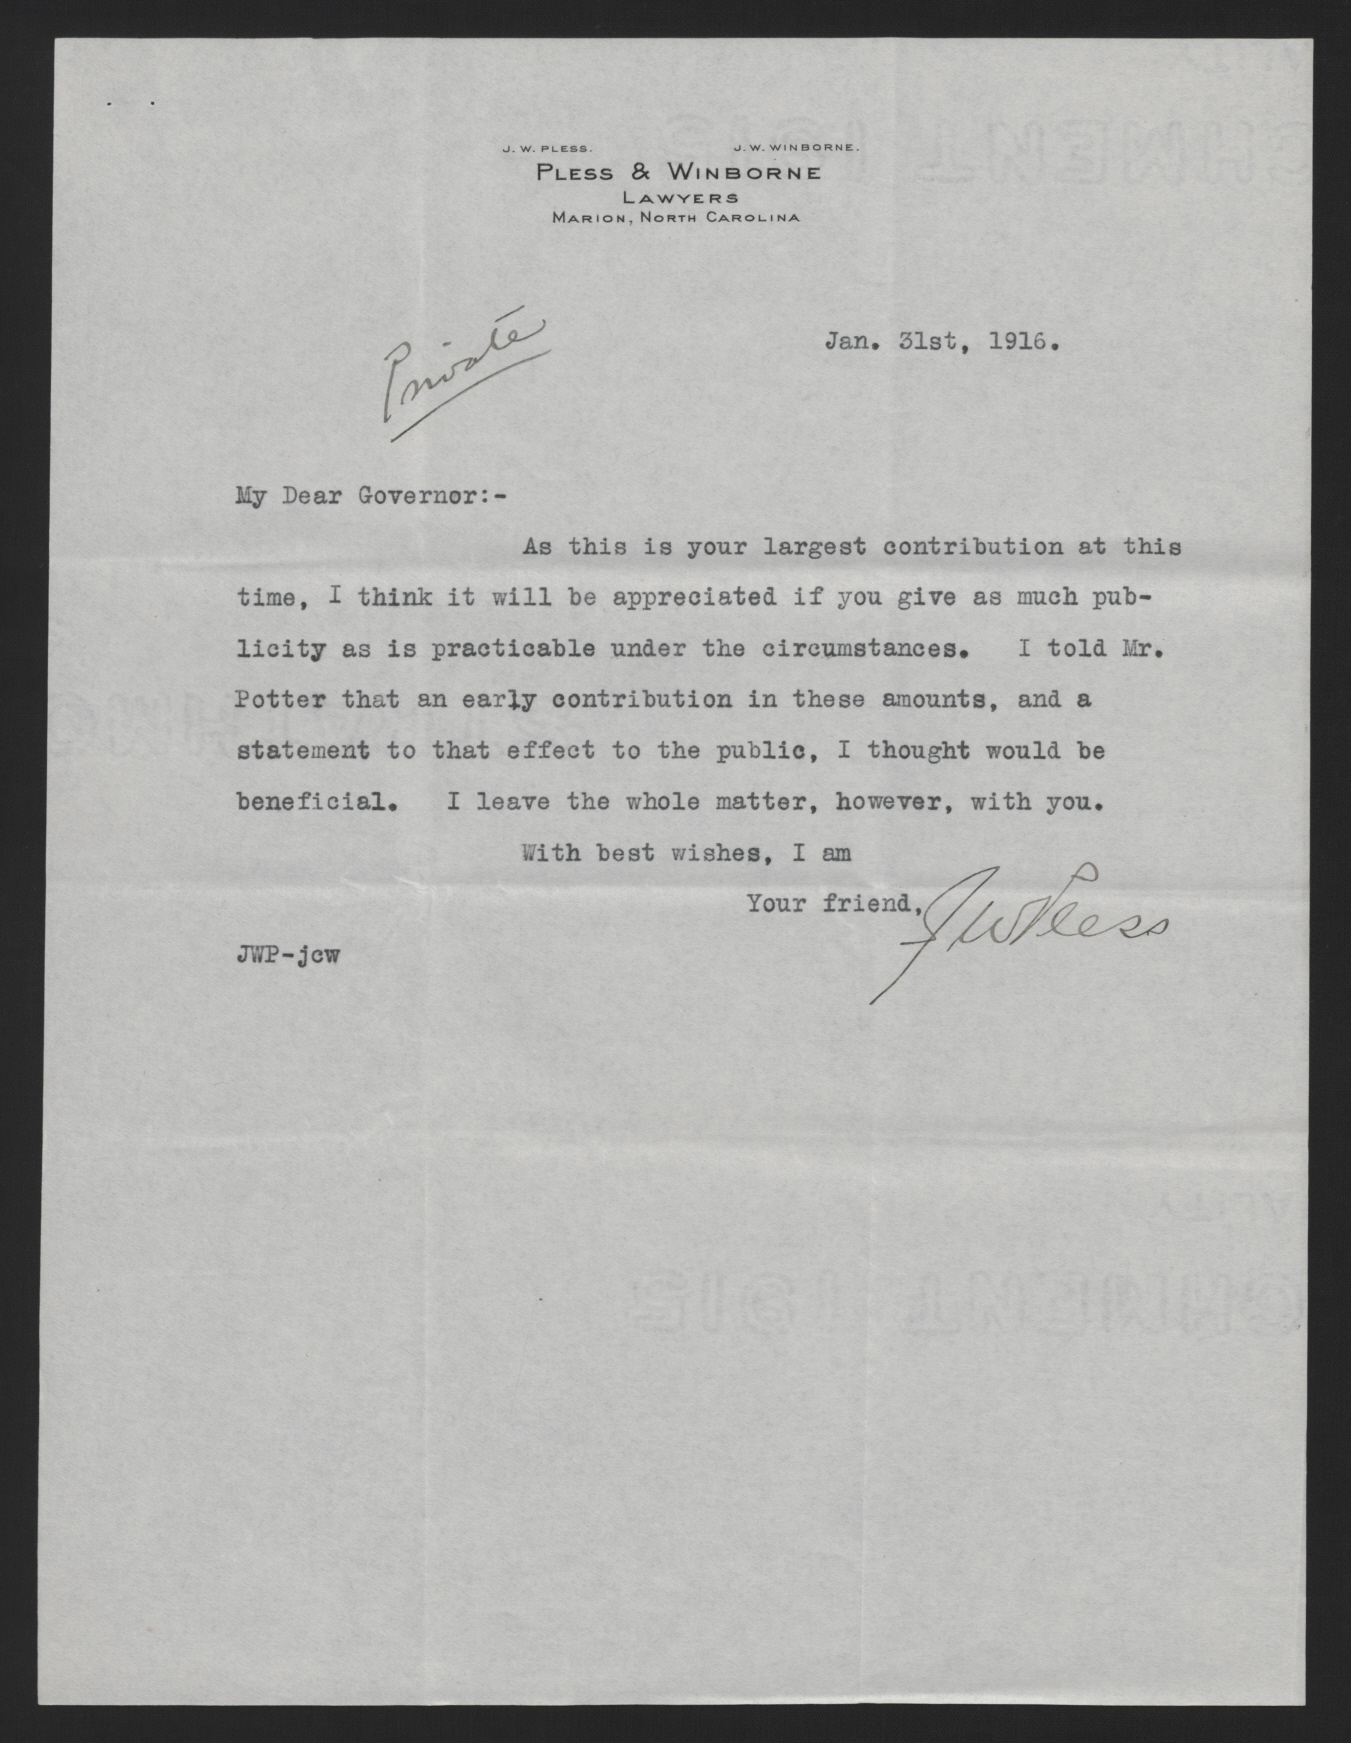 Letter from Pless to Craig, January 31, 1916